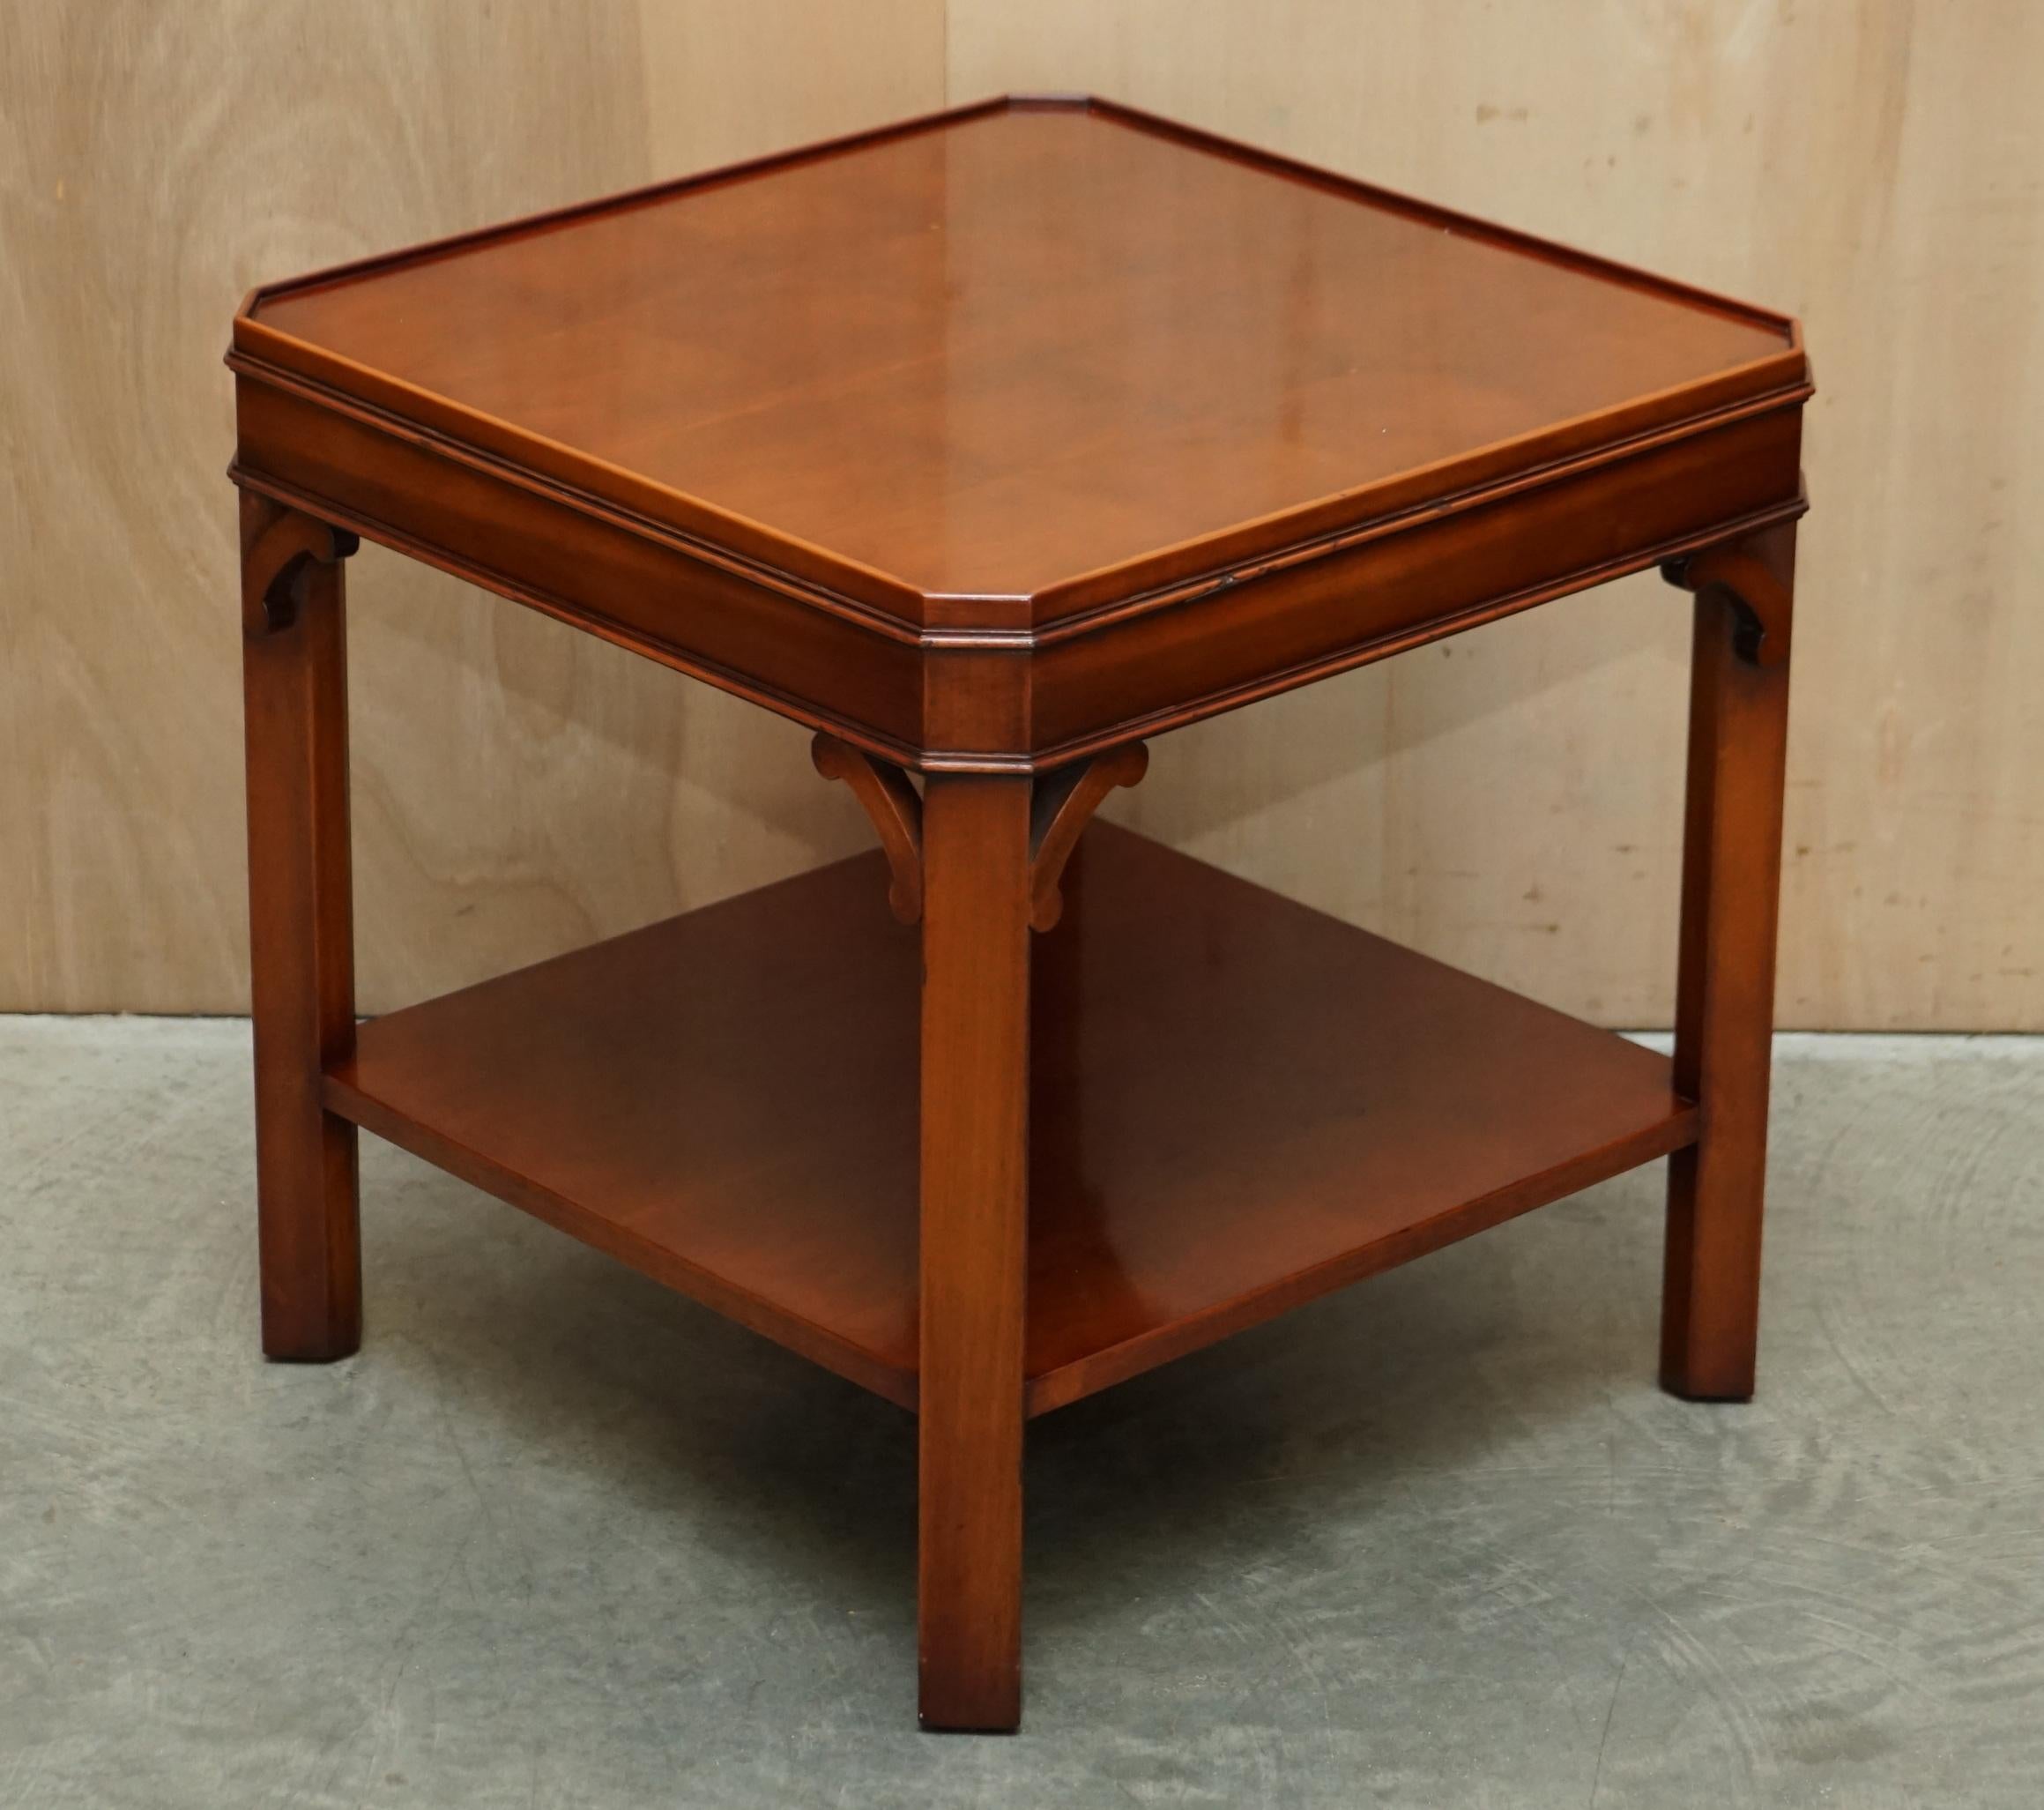 We are delighted to offer for sale this lovely pair of Georgian English style Antique Victorian mahogany side end tables.

A good looking well made and decorative pair, the elegant legs which are hand carved with Georgian English style.

We have